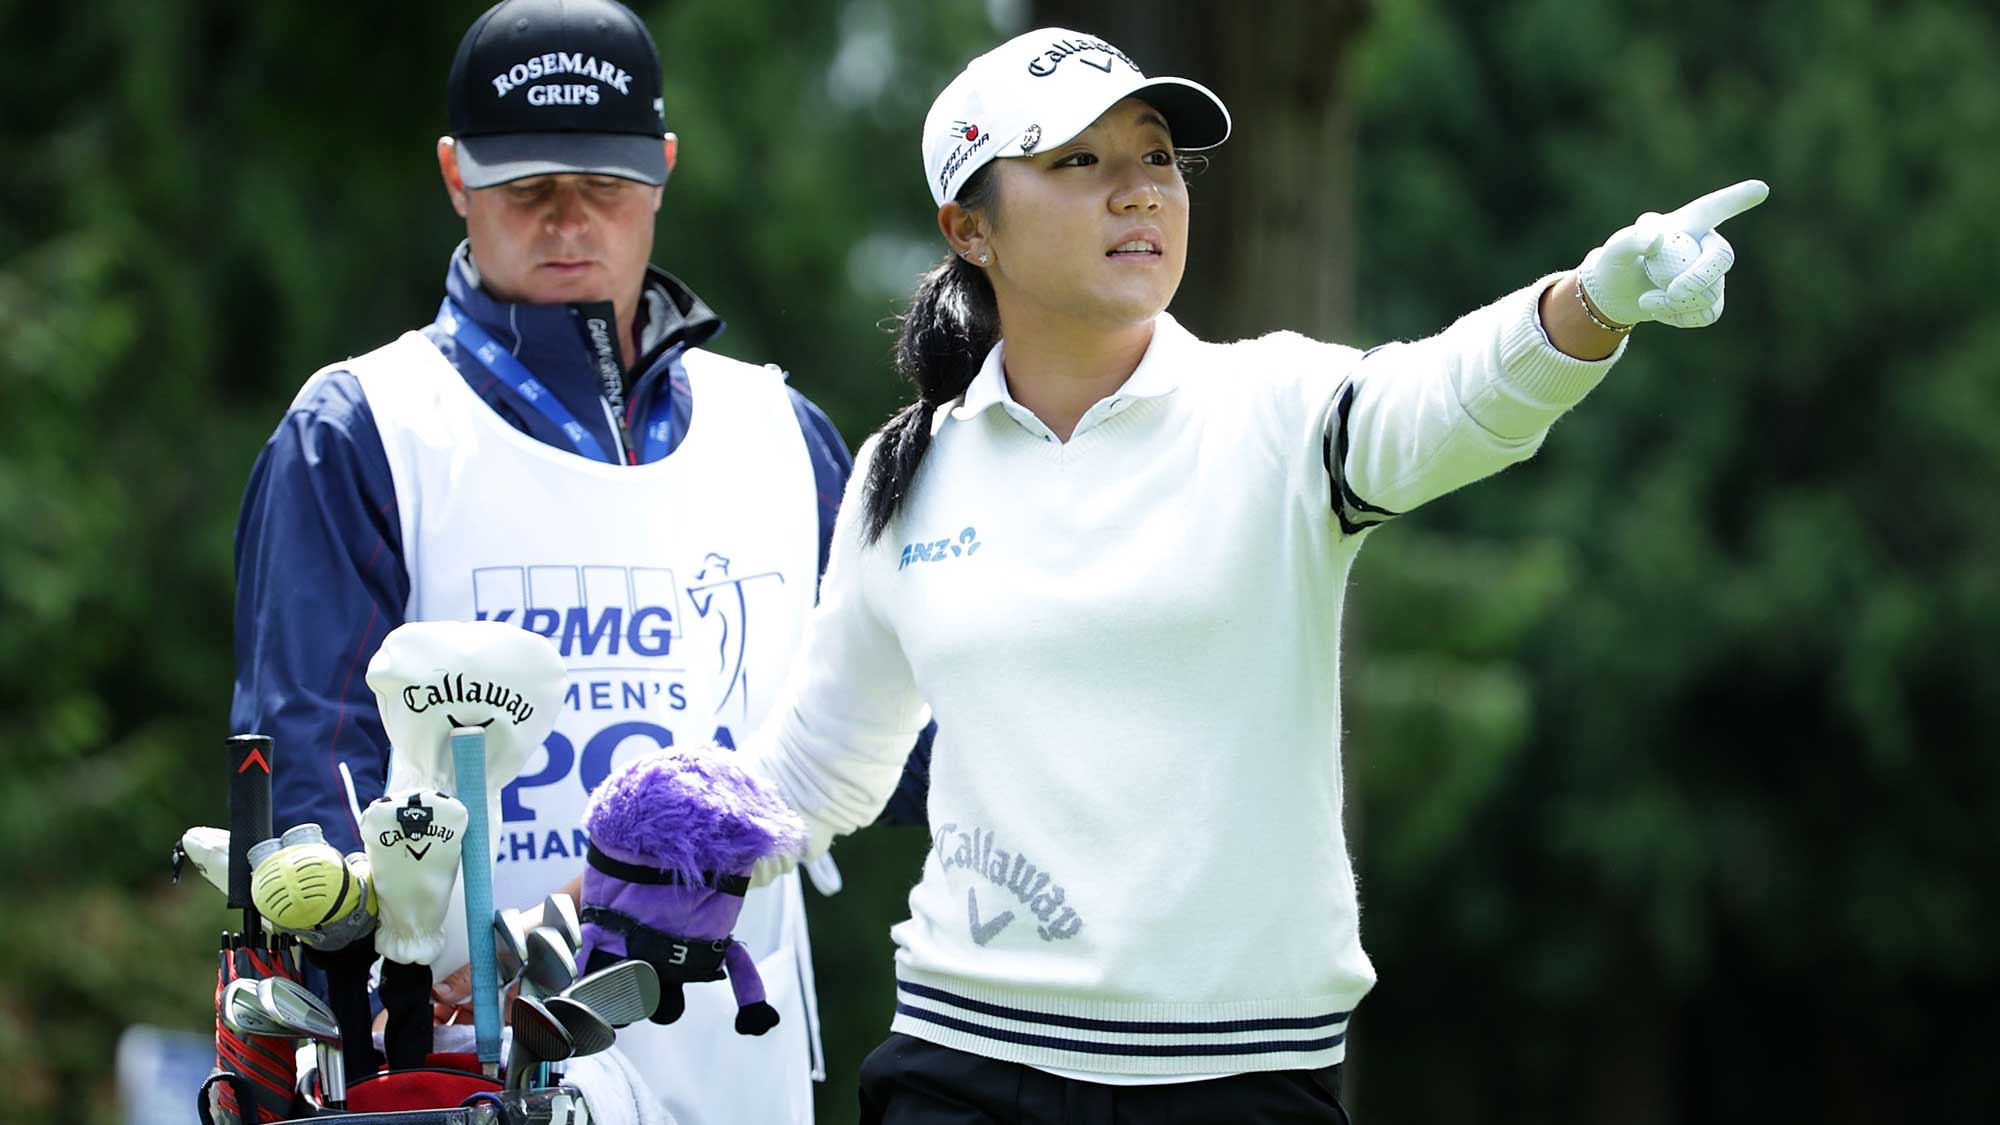 Lydia Ko of New Zealand gestures to her caddie Jason Hamilton before hitting her tee shot on the seventh hole during the third round of the KPMG Women's PGA Championship